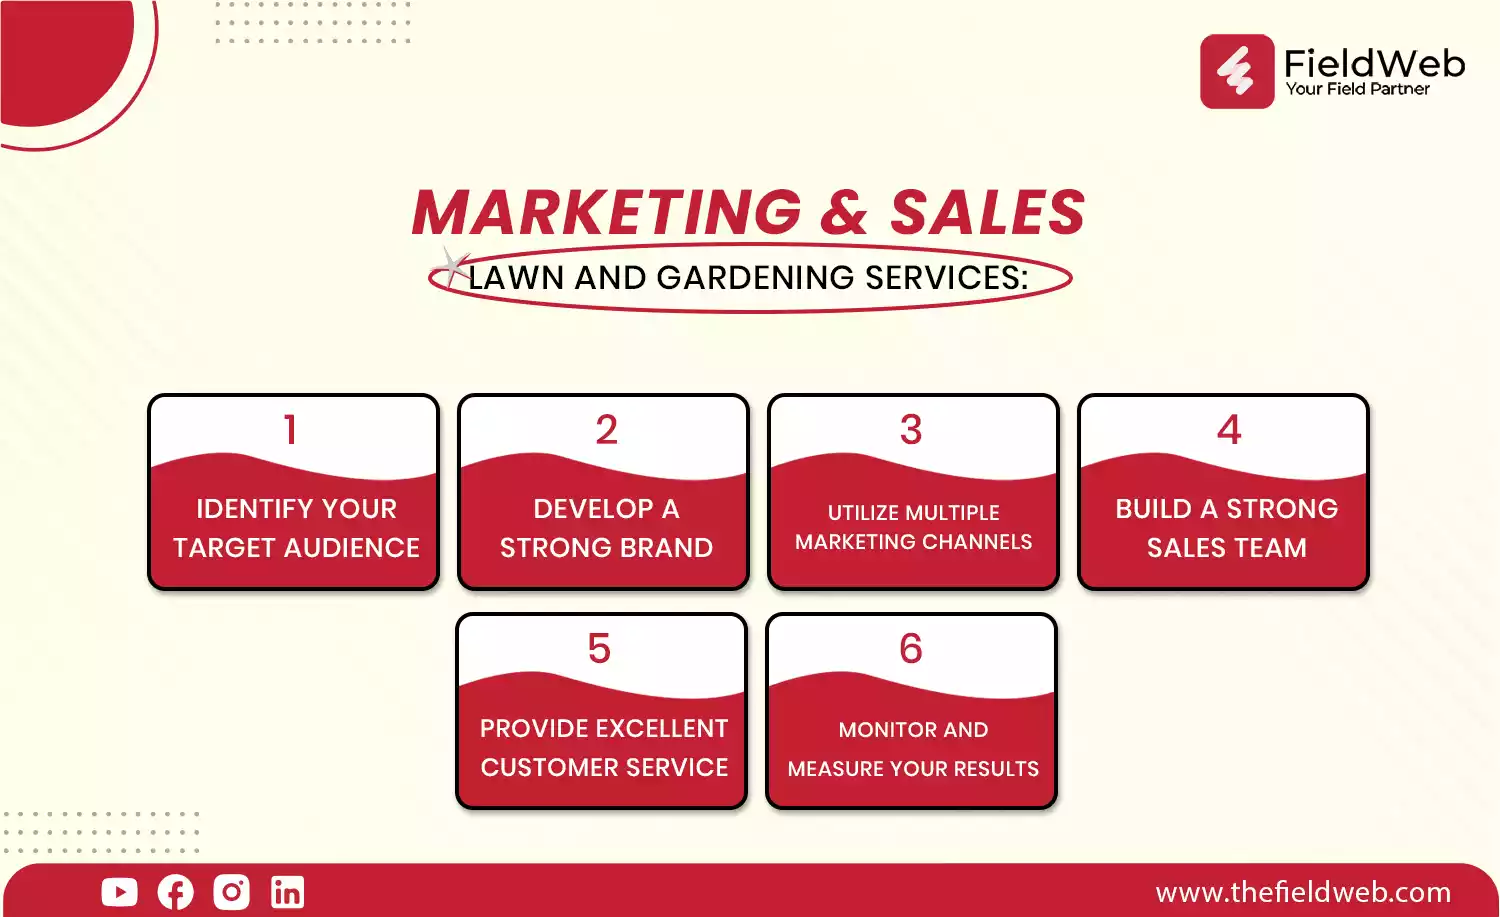 image is displaying several pointers of sales and marketing for lawn and gardening services